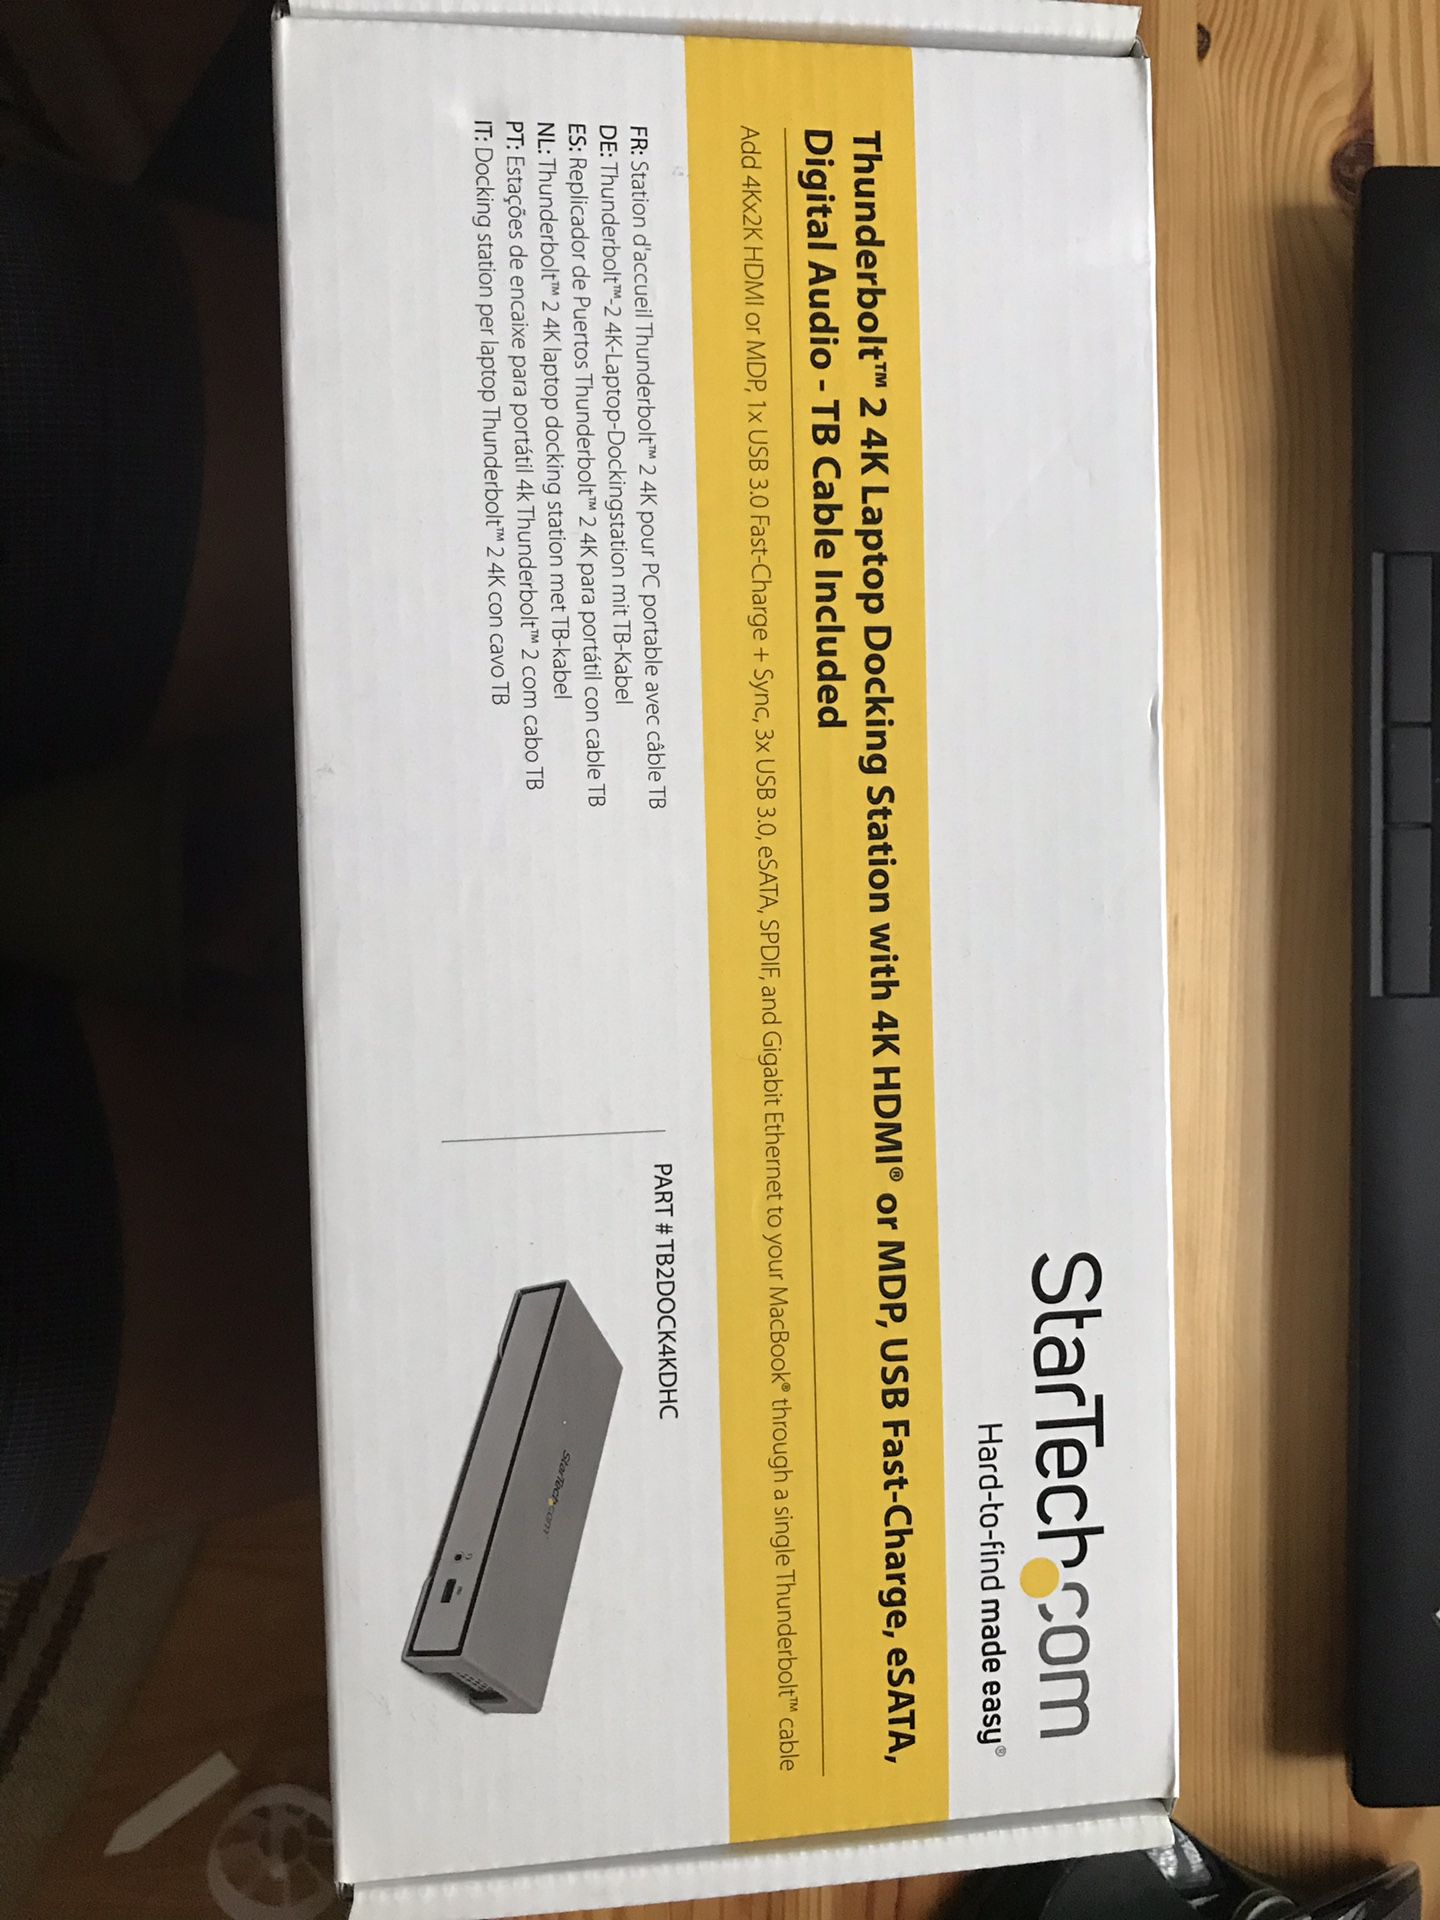 NEW StarTech Thunderbolt 2 4K Laptop Docking Station w 4K HDMI or MDP, USB Fast-Charge, eSATA, Digital Audio - TB Cable Included